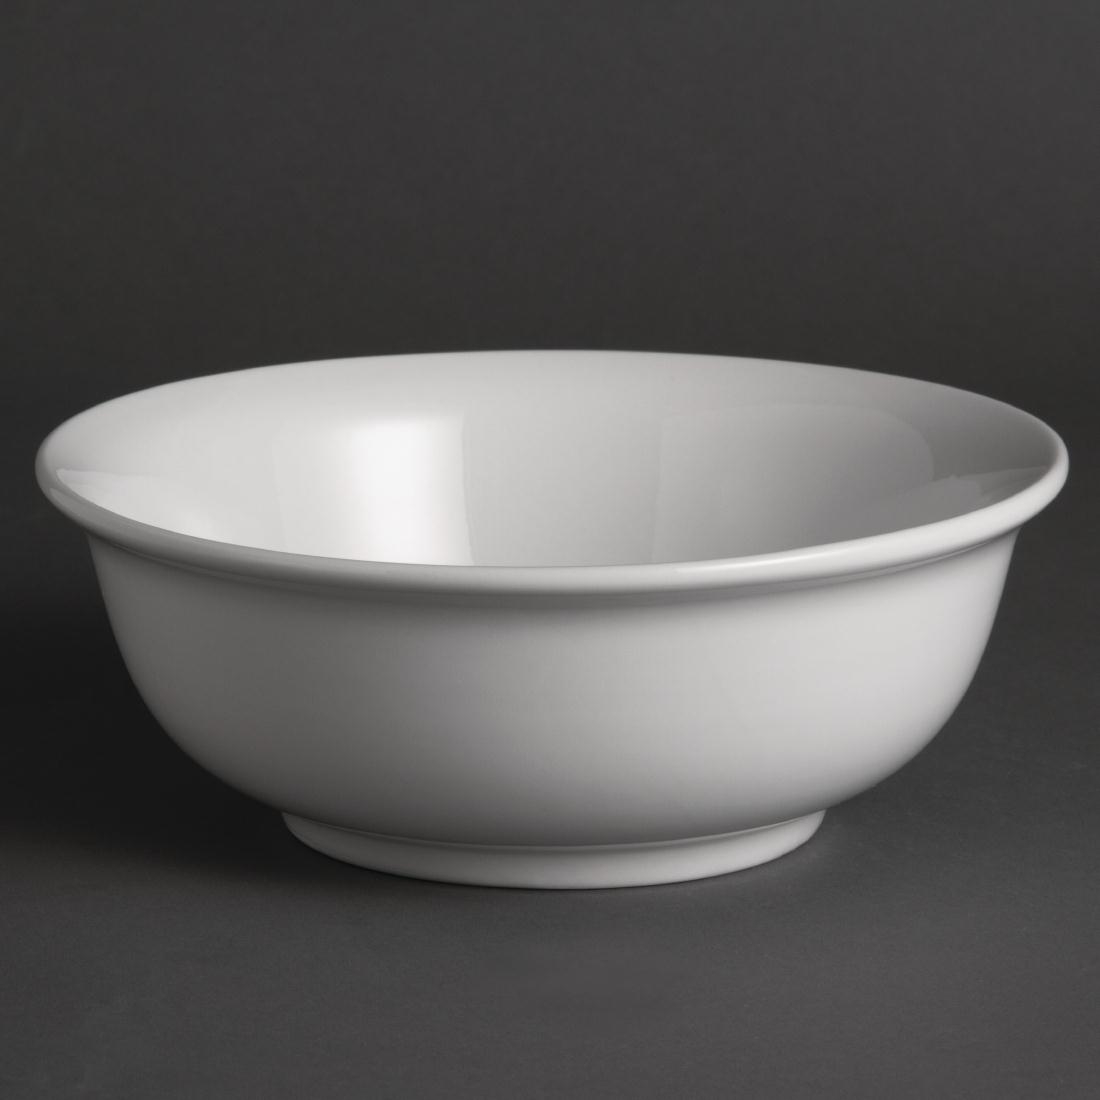 Olympia Whiteware Salad Bowls 200mm